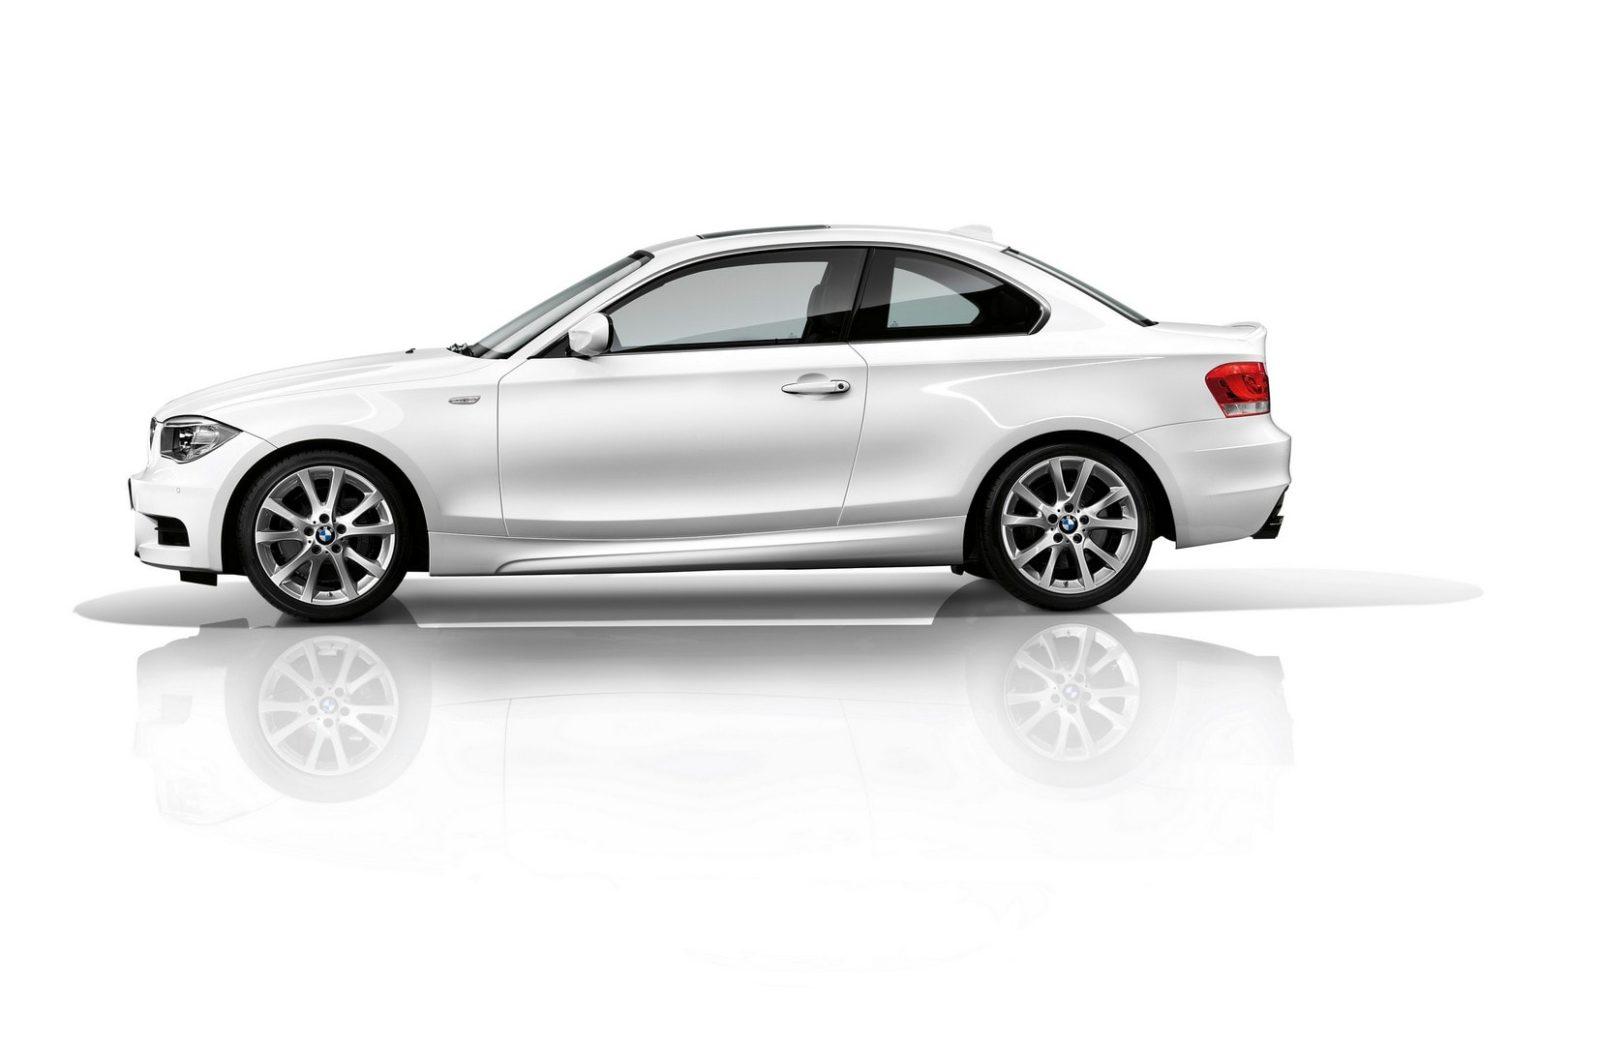 P90070533 highRes bmw 1 series coupe 1 830x543